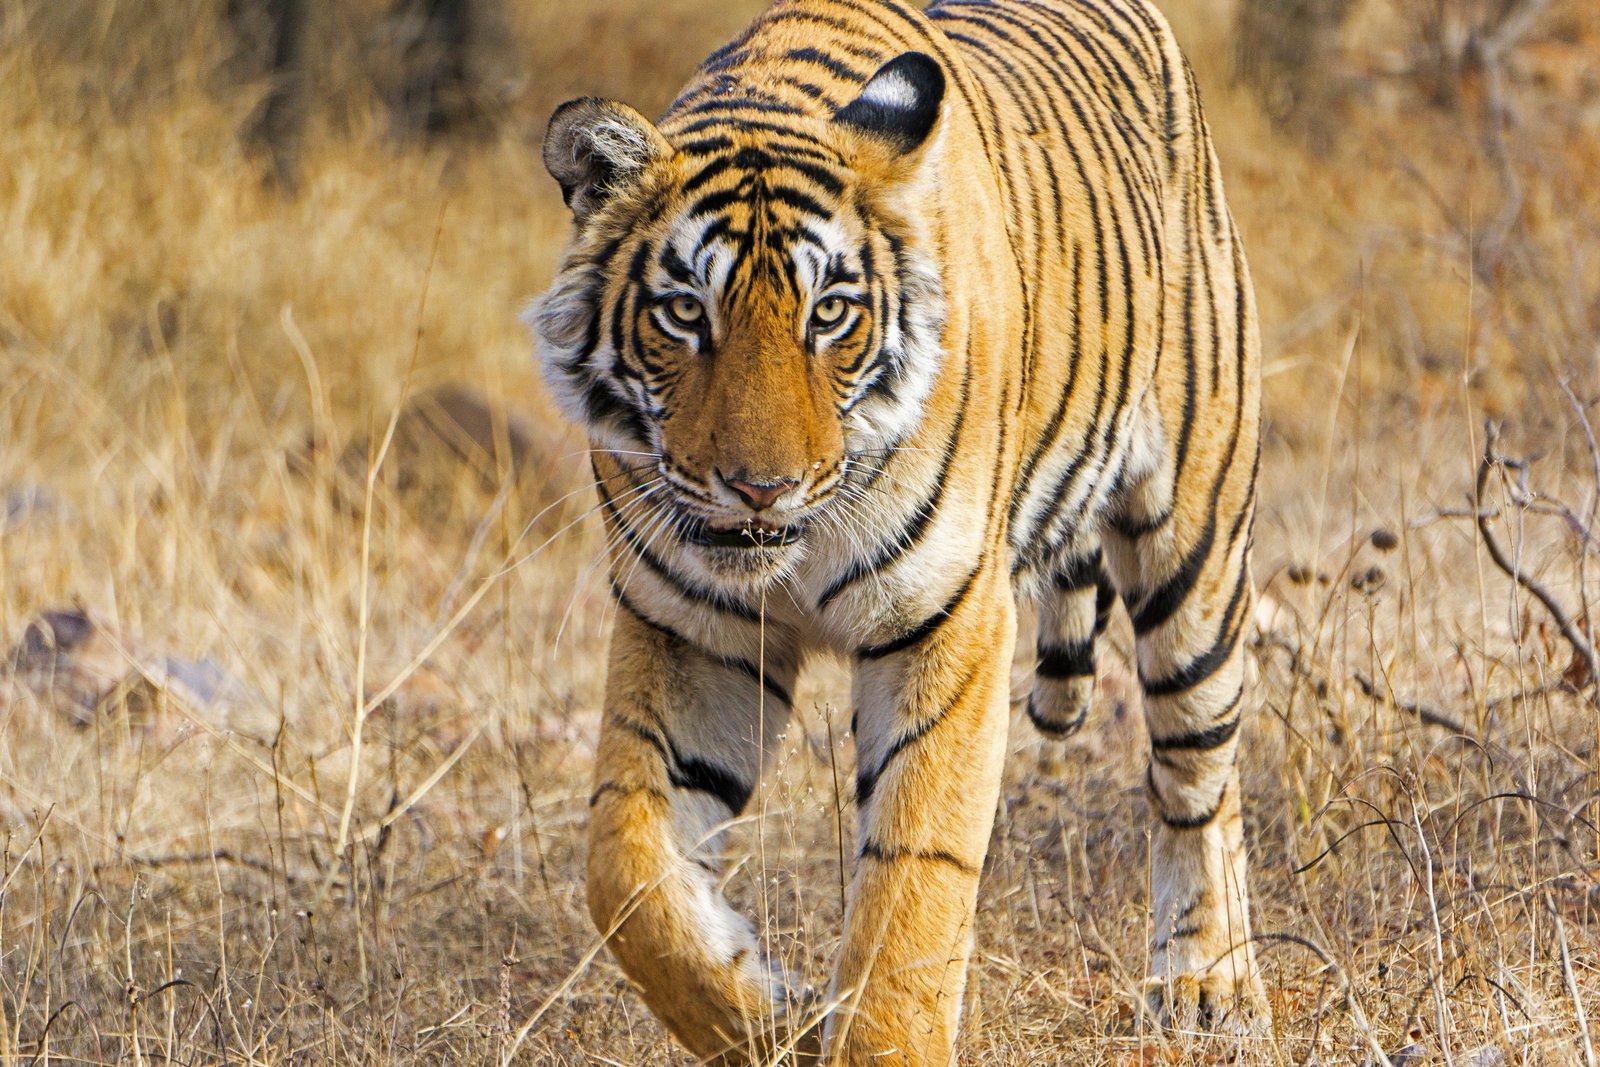 Adult Tiger Walking In the Wild